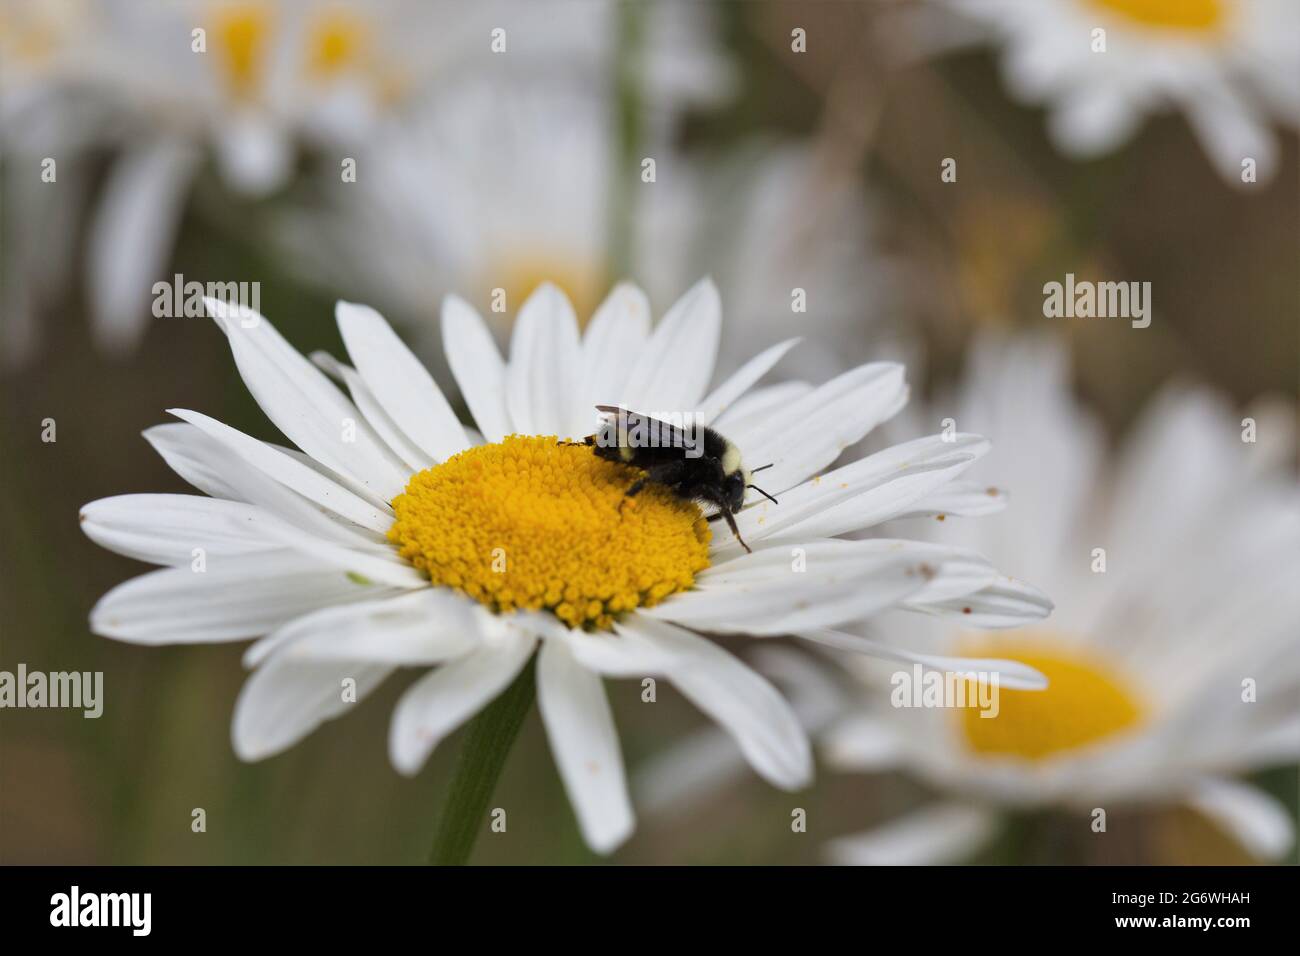 Close up of a bee on a daisy flower. Stock Photo